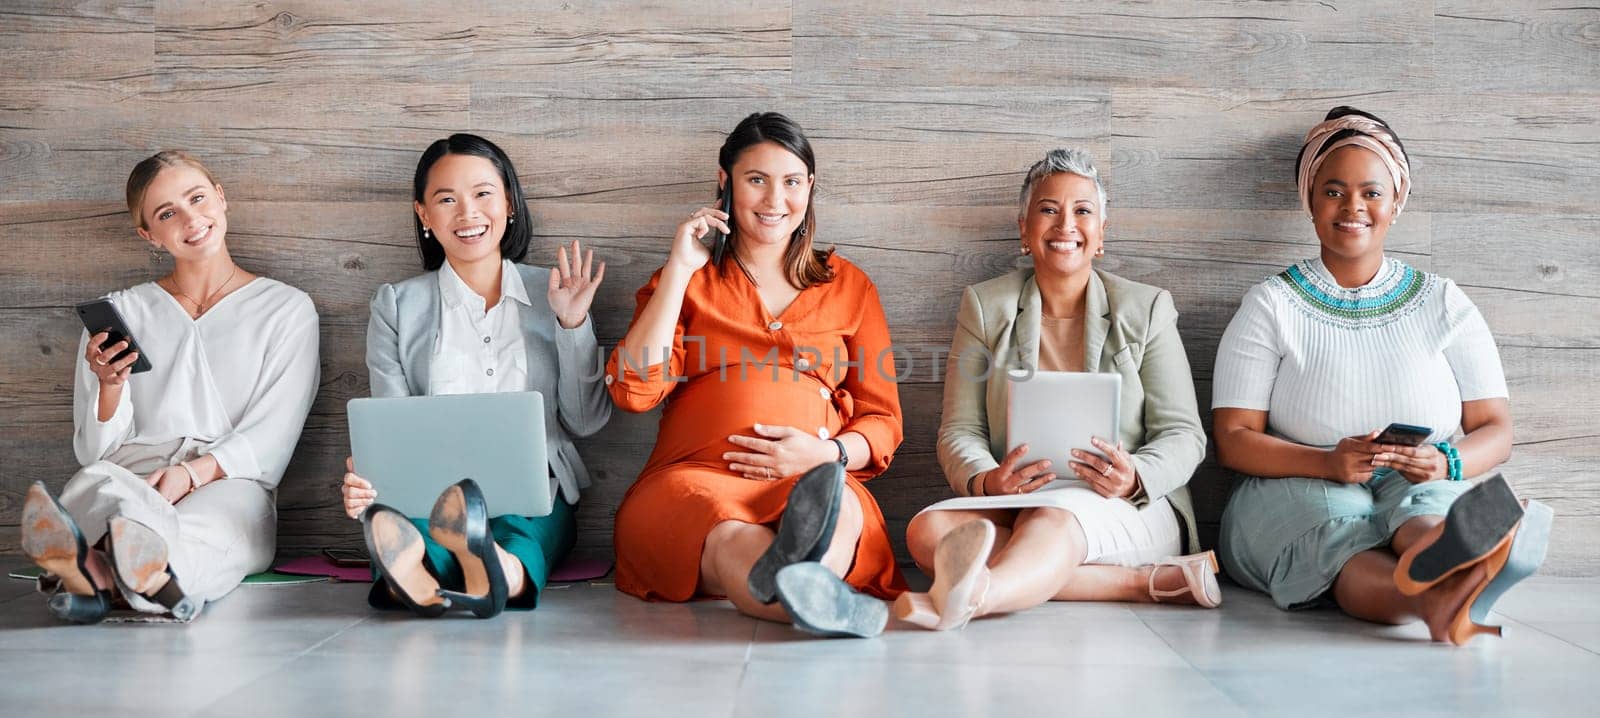 Creative business people, portrait smile and networking sitting together on floor at office. Happy group of employee women smiling with technology in team hiring, welcome or management for startup by YuriArcurs